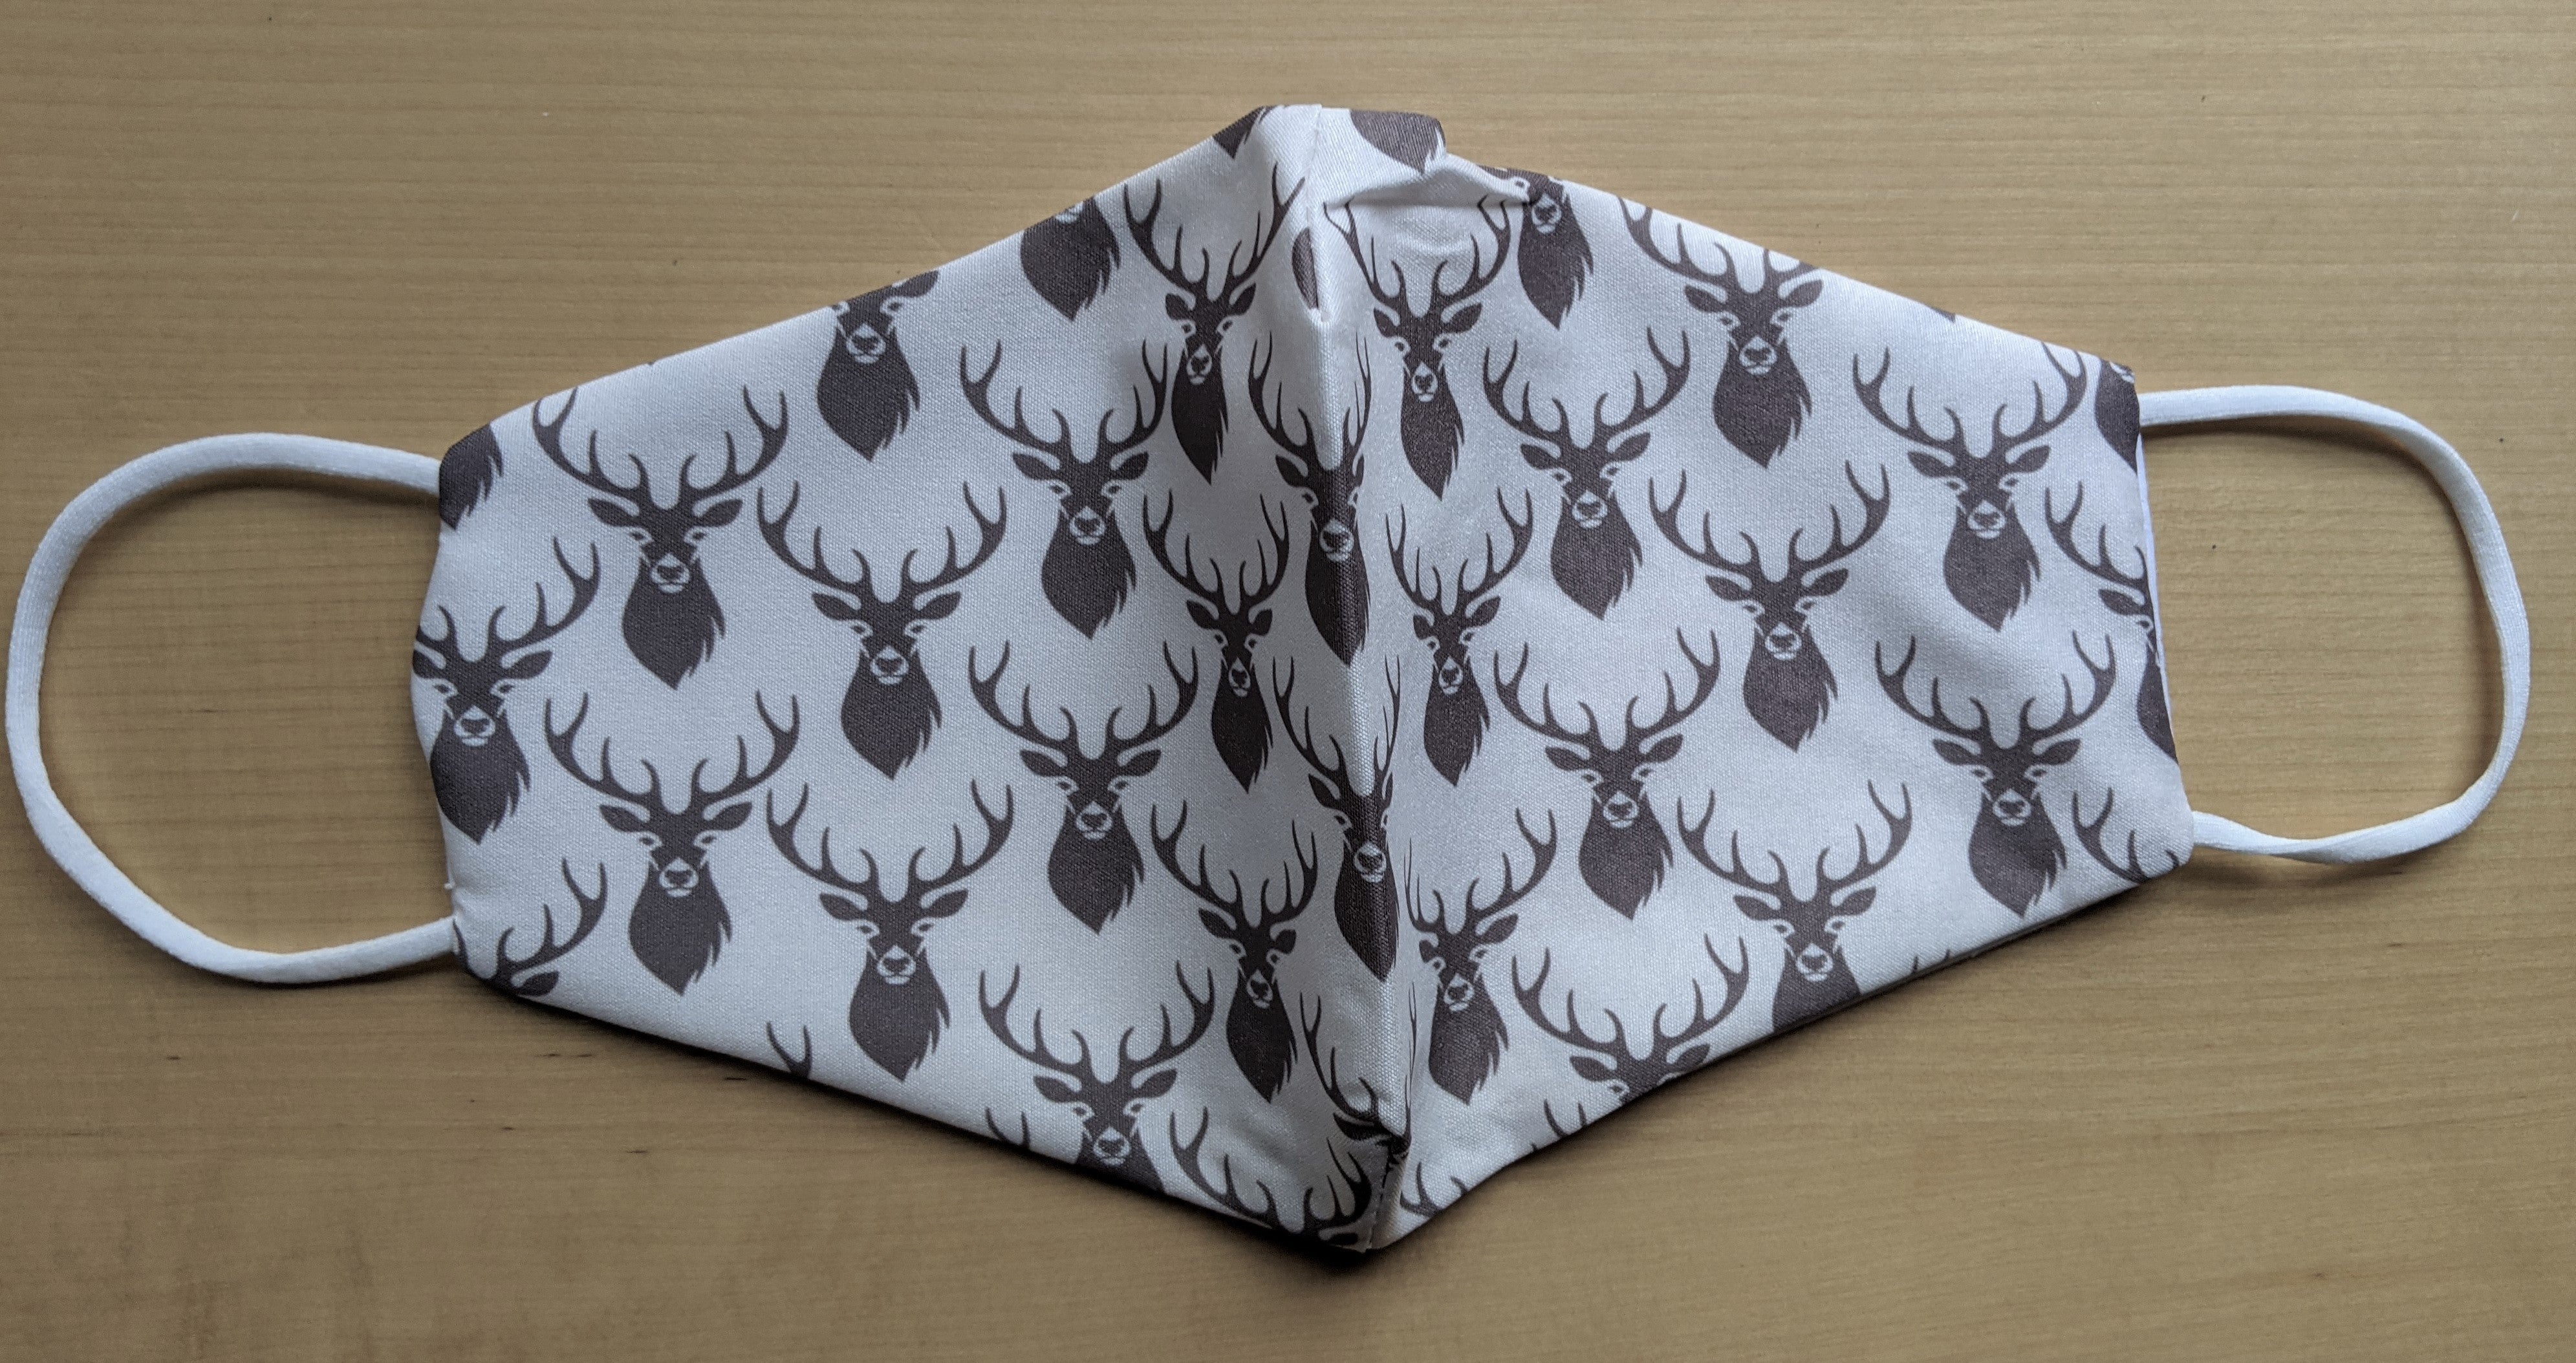 Highland Stag Face Mask | Glen Appin | Scottish Creations